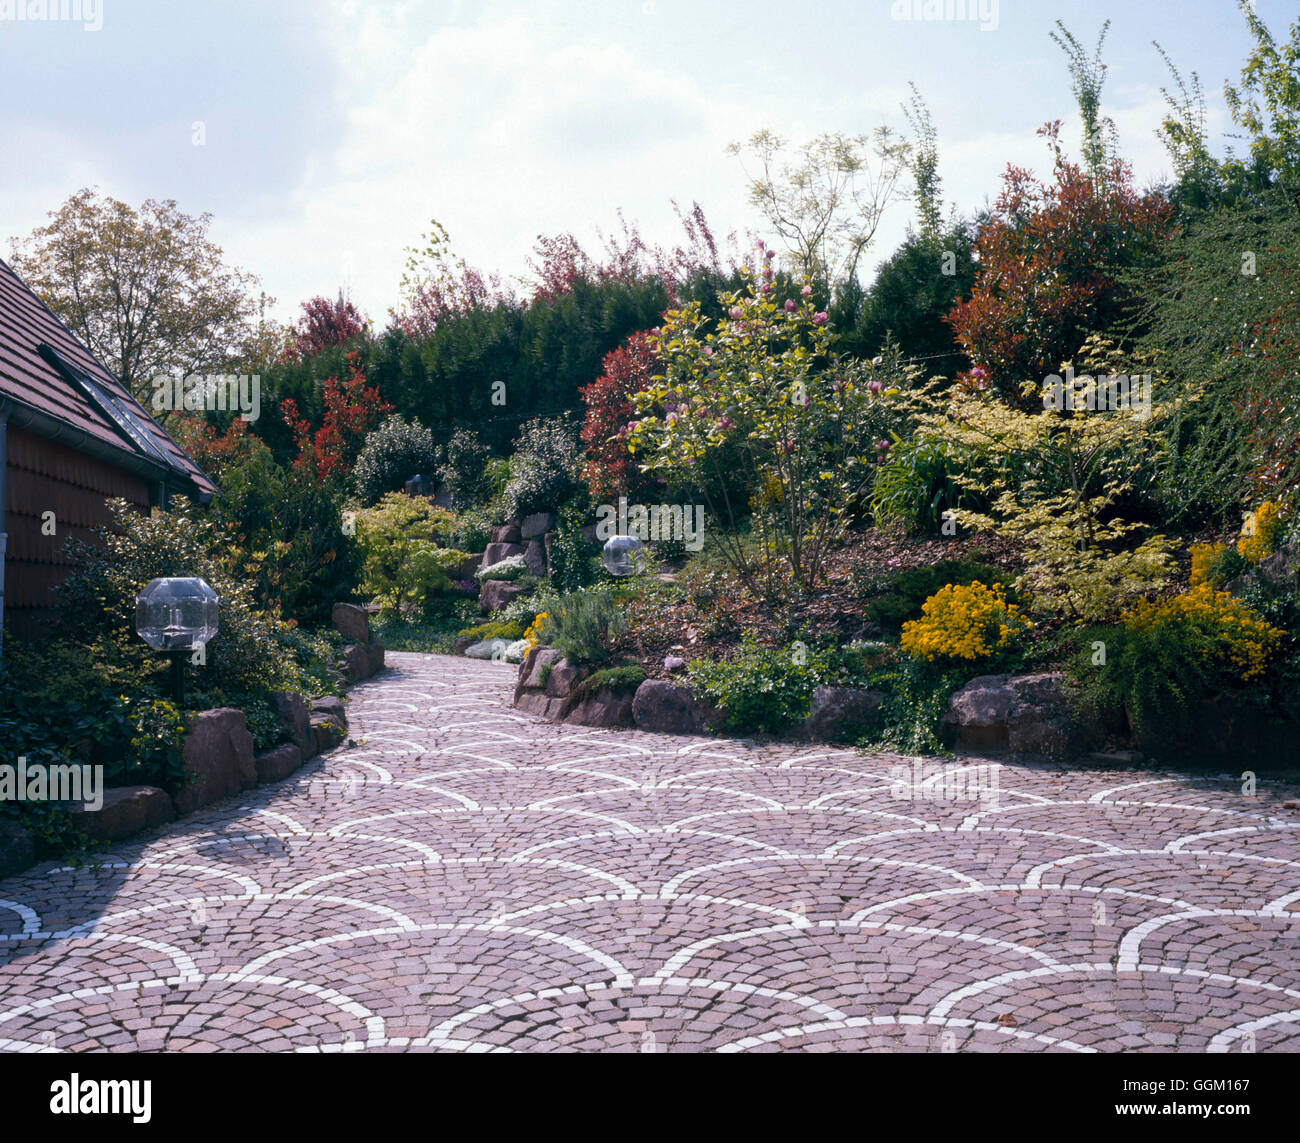 Paths and Paving - Ornamental block paving   PAP066761 Stock Photo